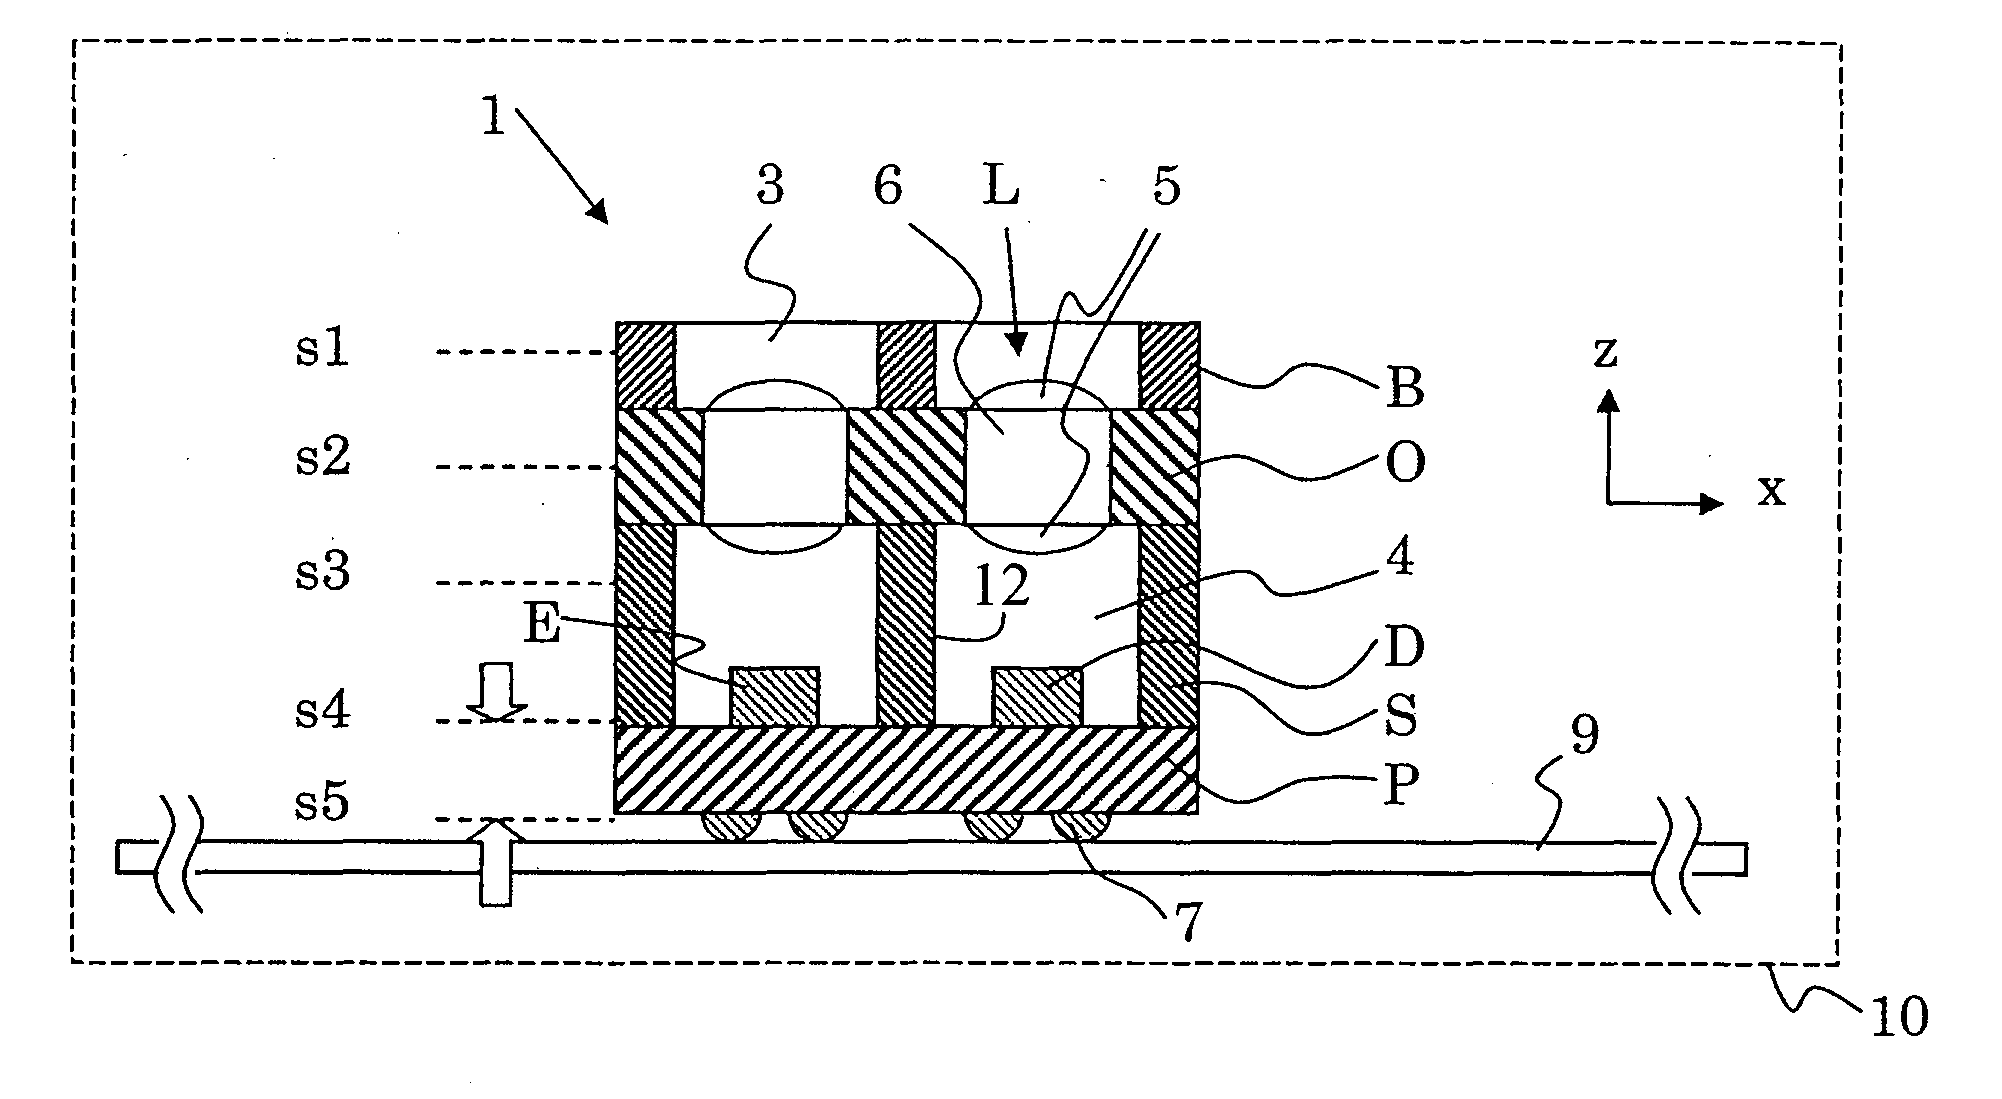 Opto-electronic module including a non-transparent separation member between a light emitting element and a light detecting element